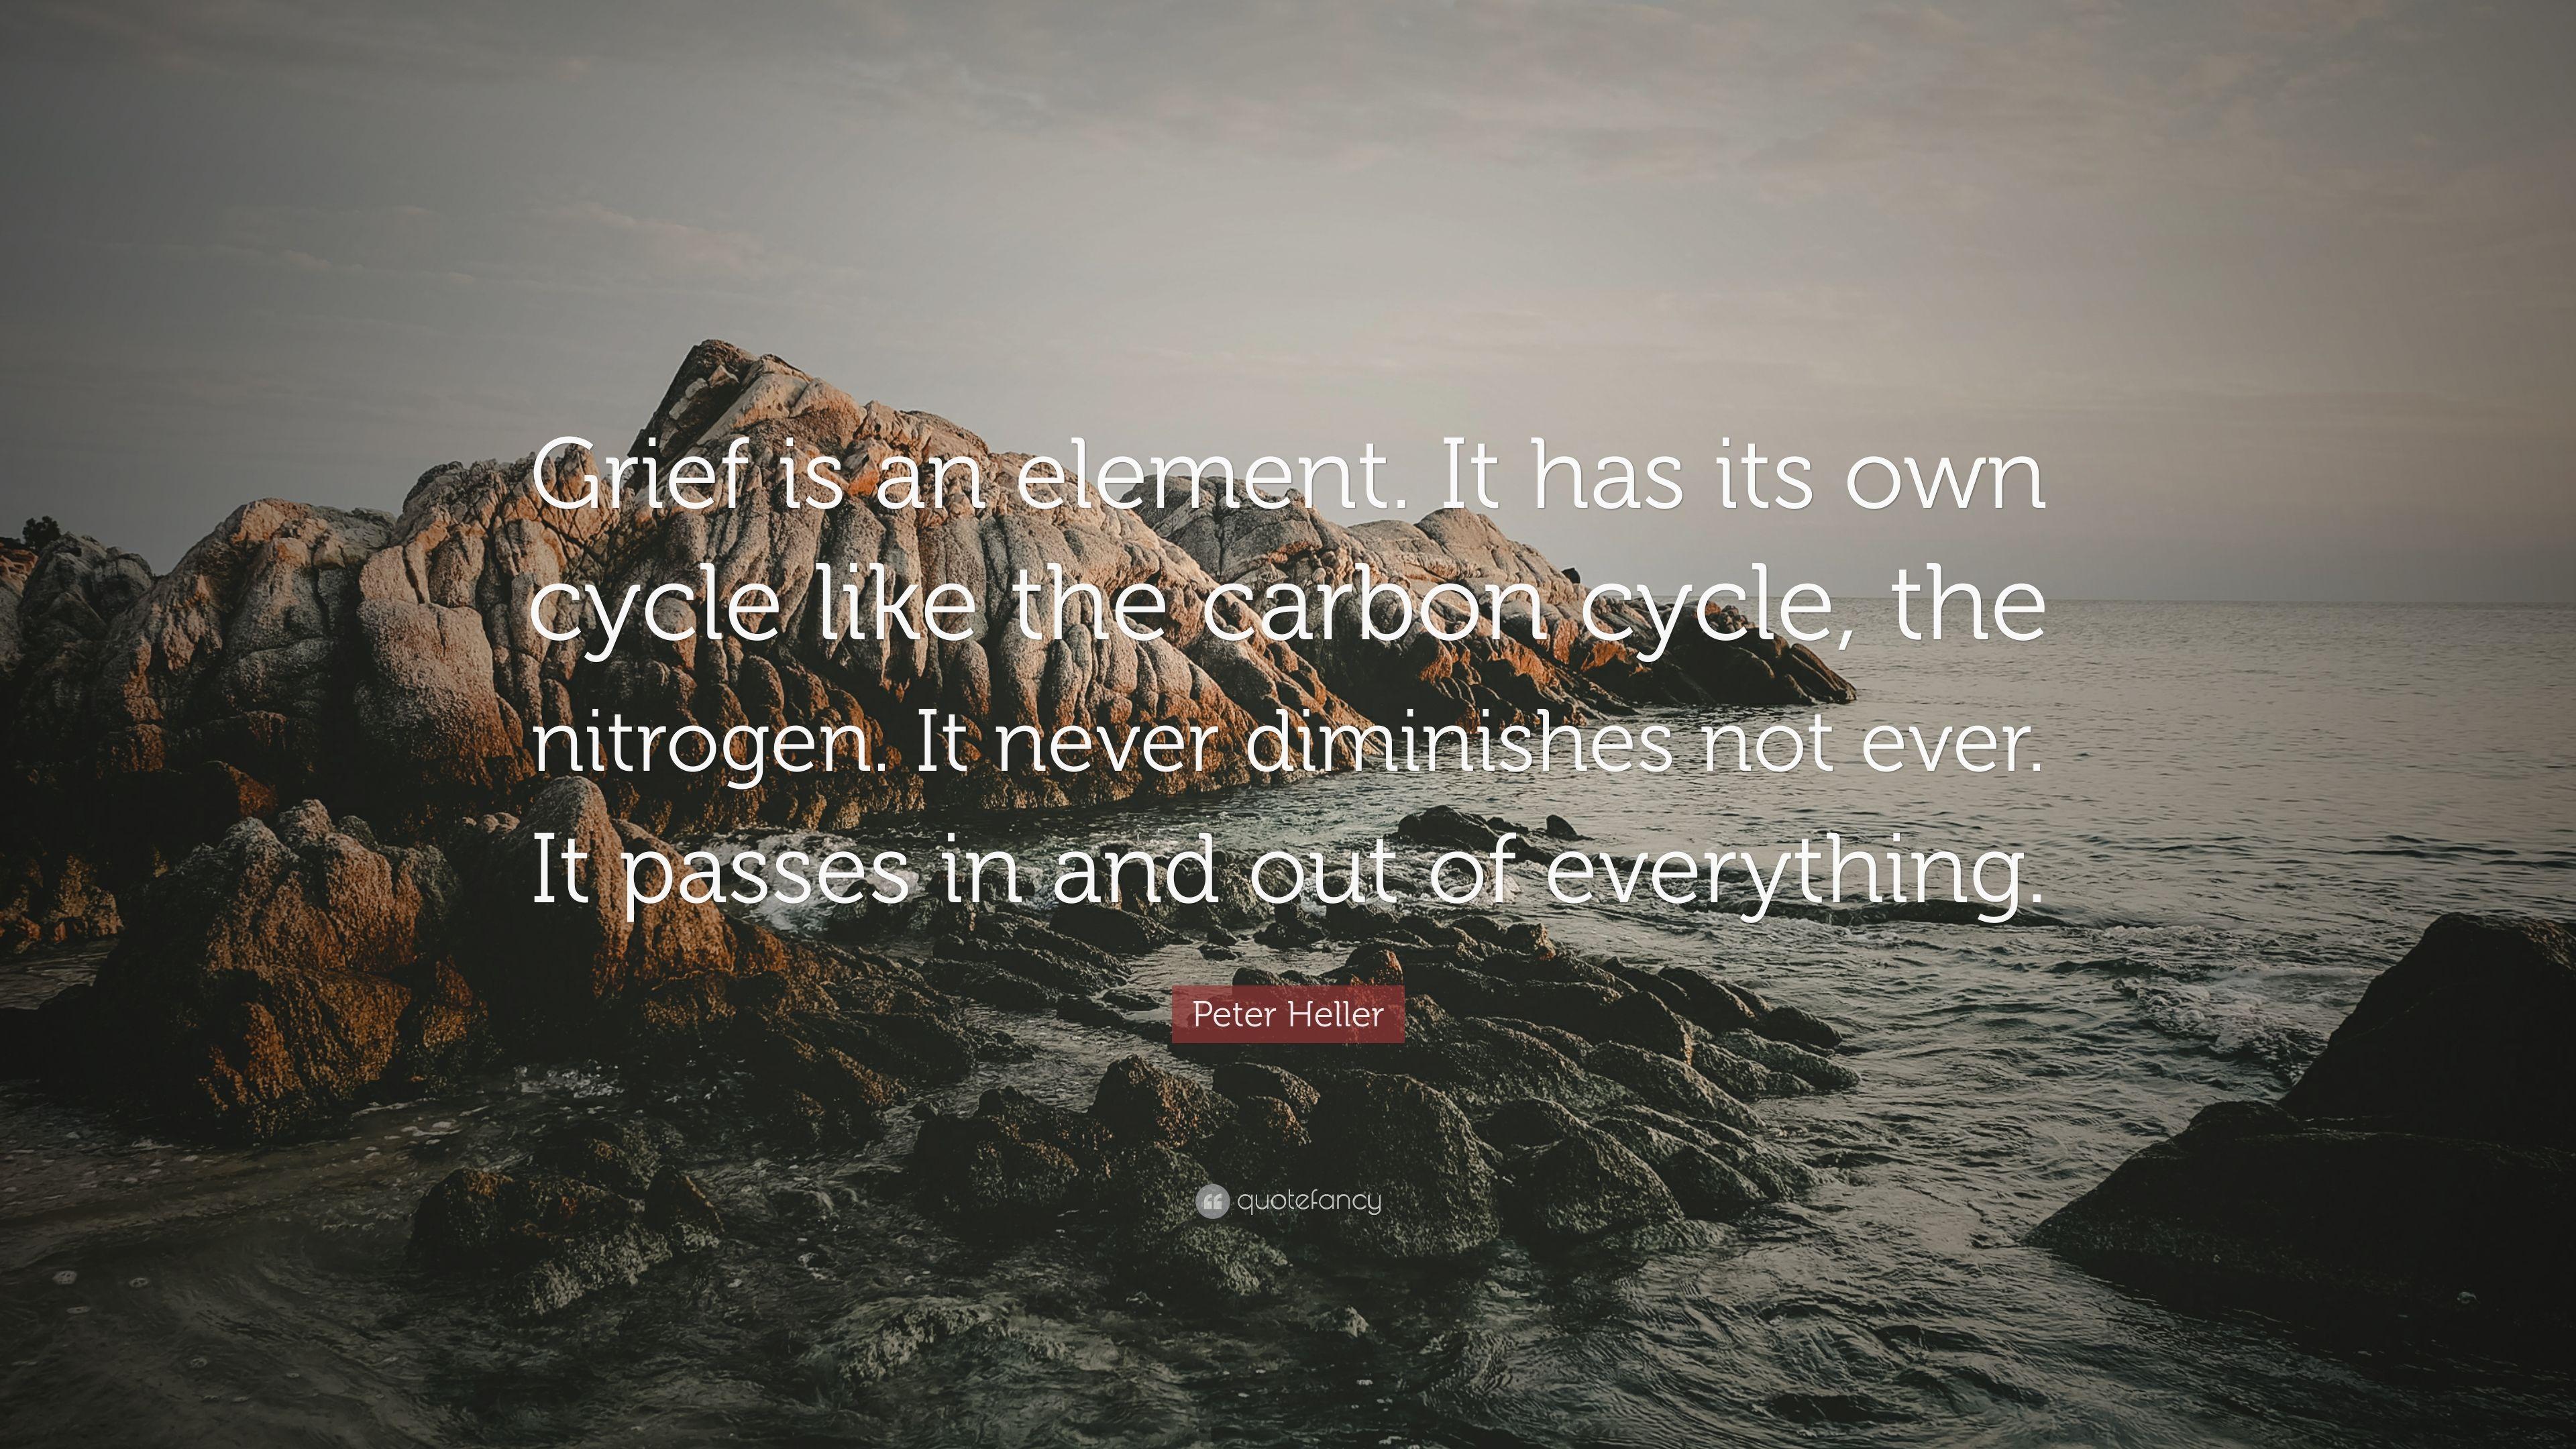 Peter Heller Quote: “Grief is an element. It has its own cycle